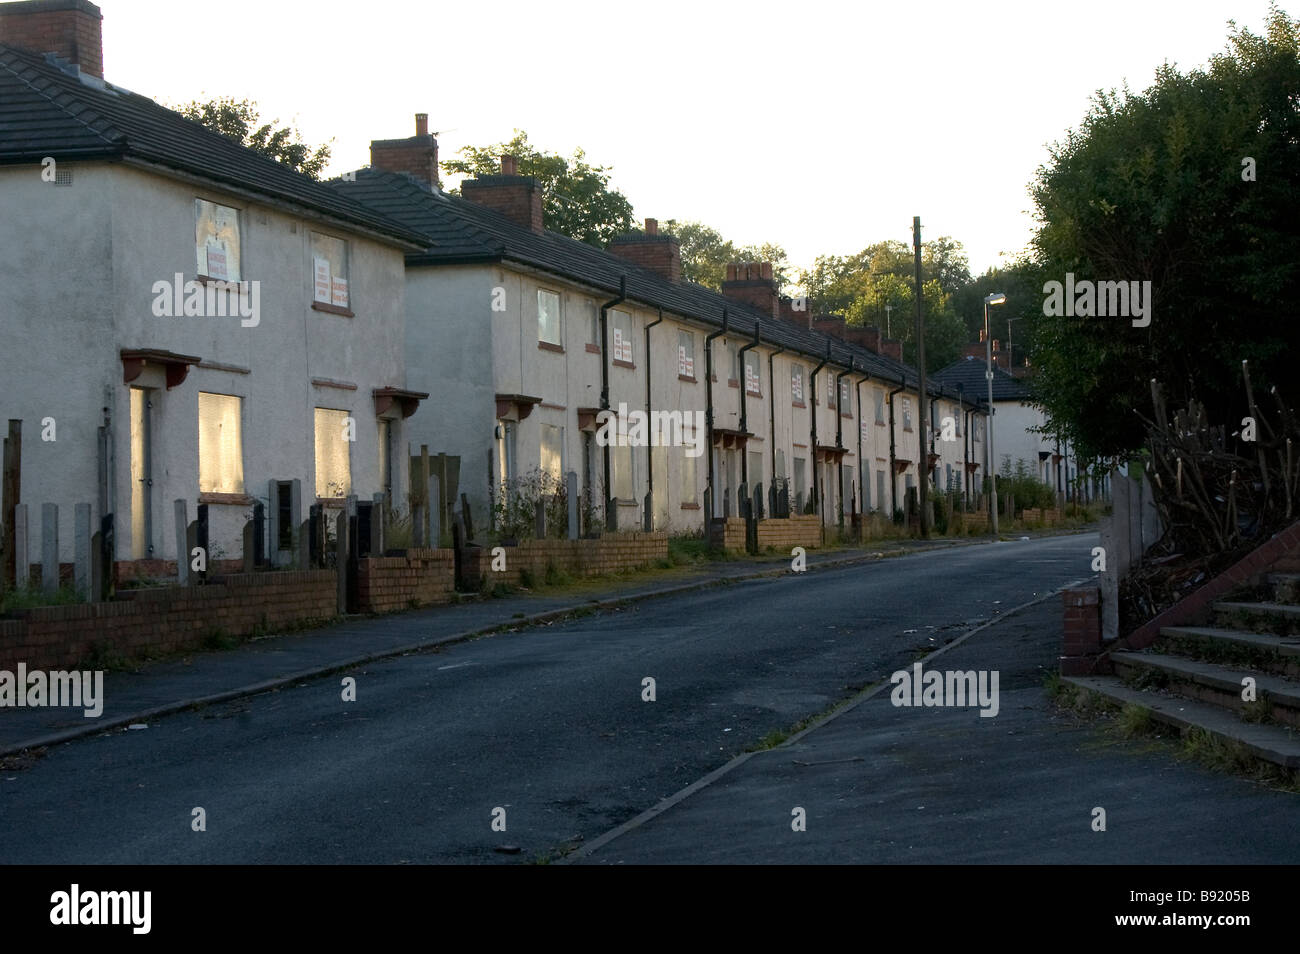 Boarded up houses ready for demolition on the Priory Council Estate, Dudley, West Midlands, UK Stock Photo